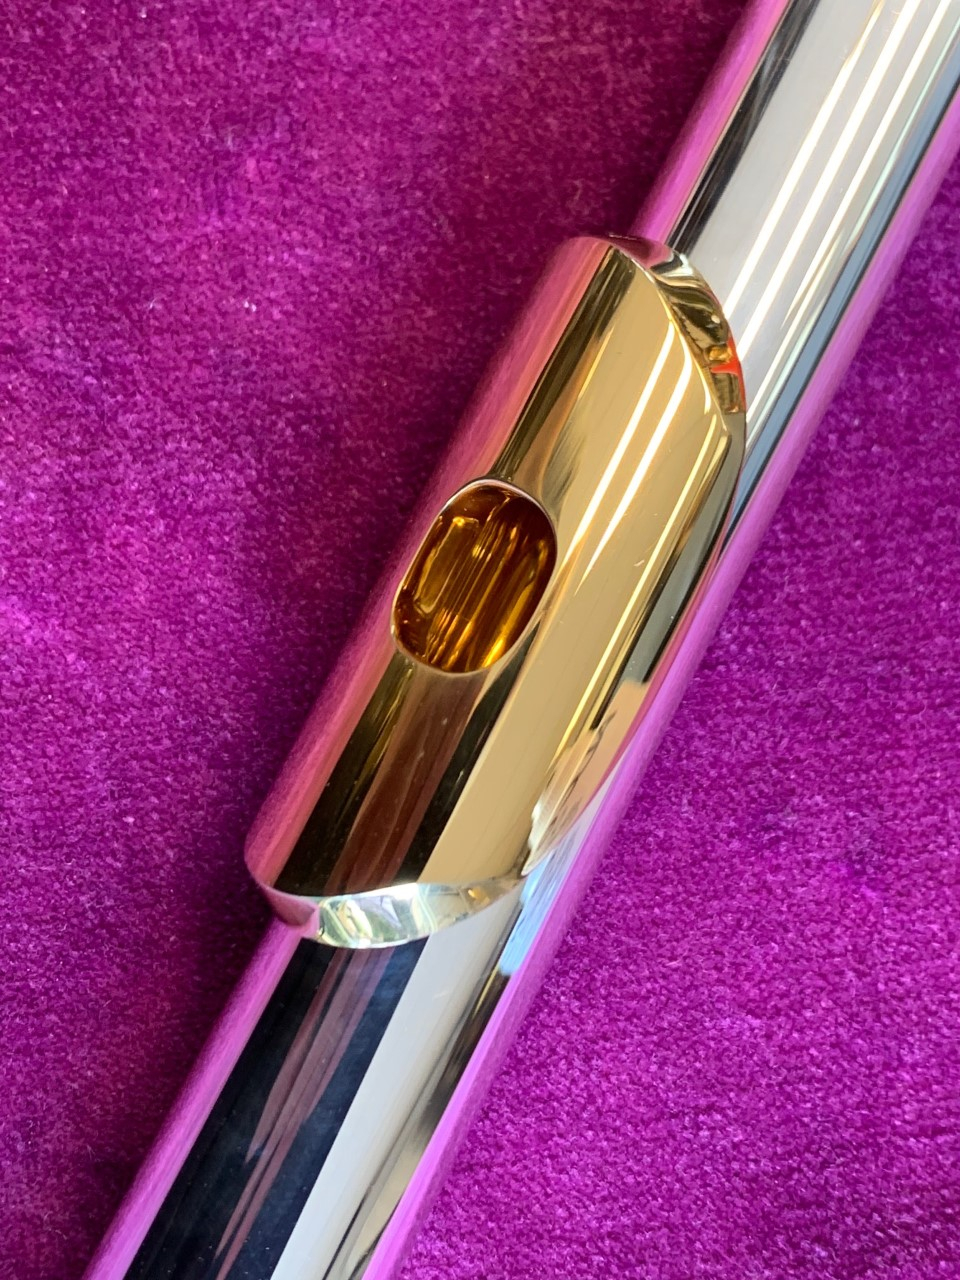 Pearl Flute Headjoint - Forte - .970 Pristine Silver - Gold Plated